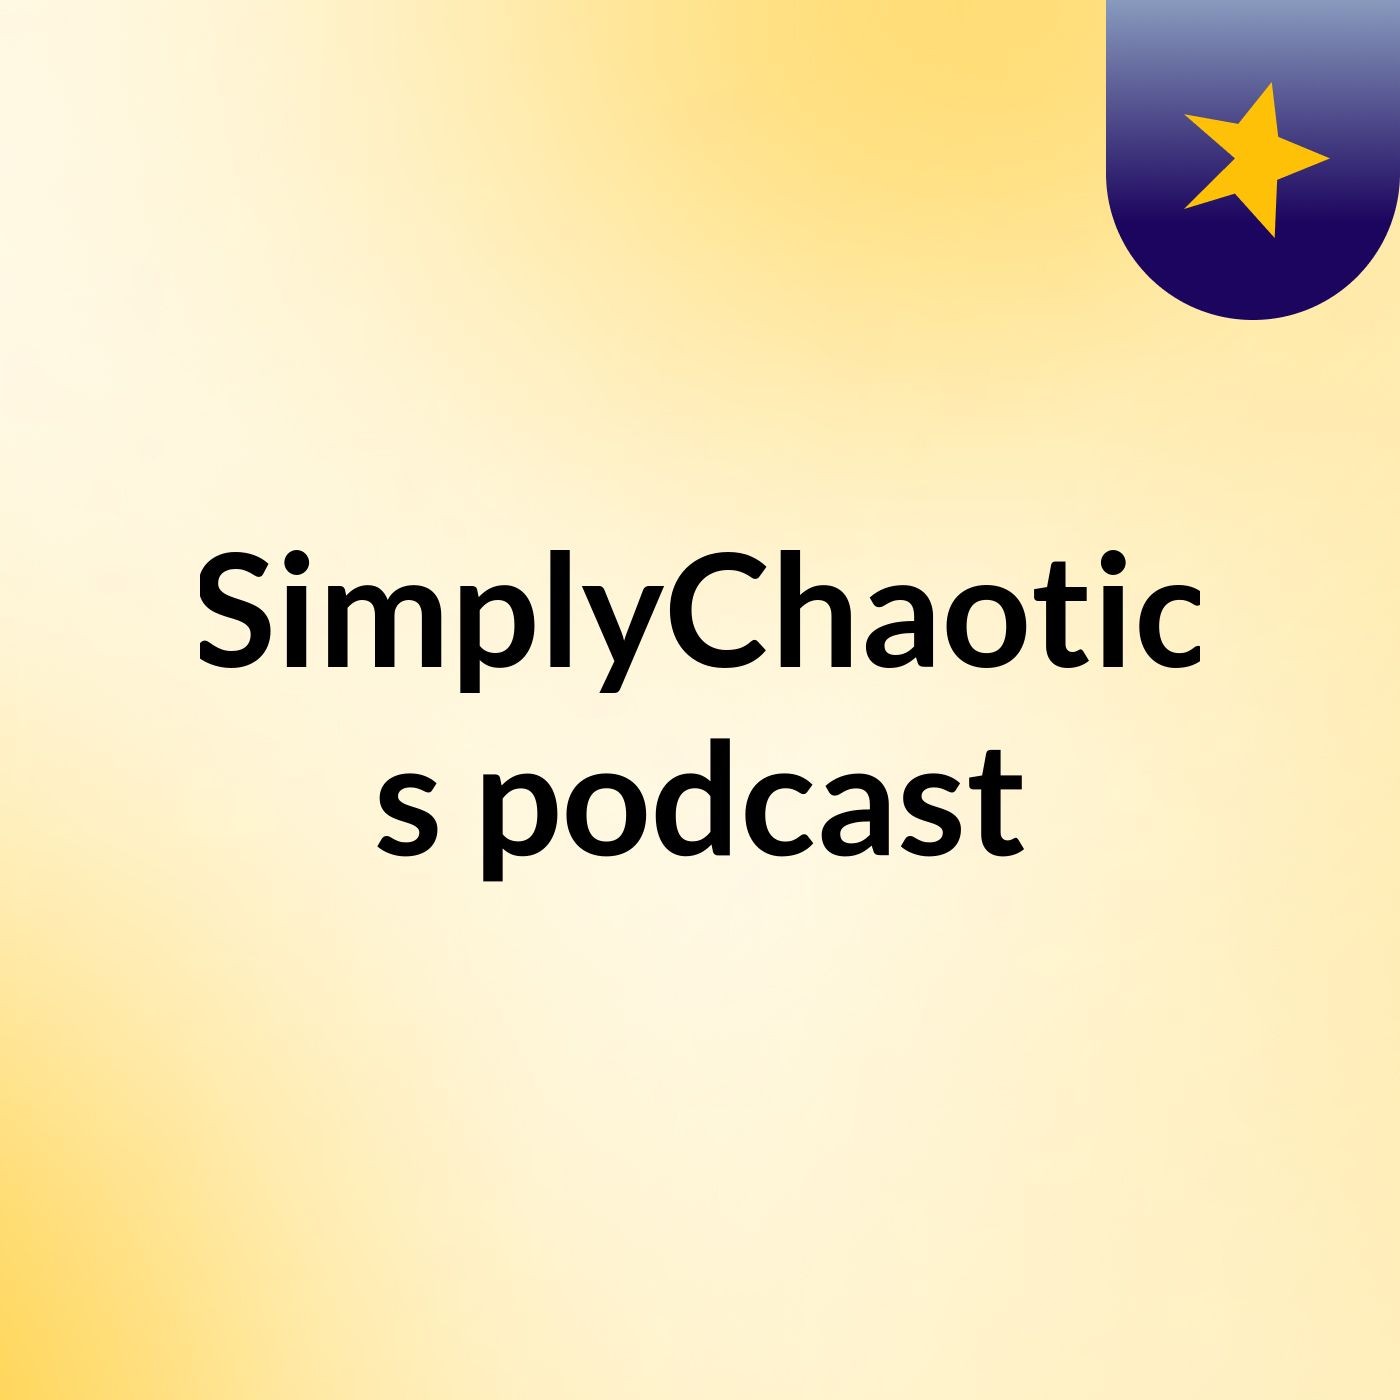 SimplyChaotic's podcast